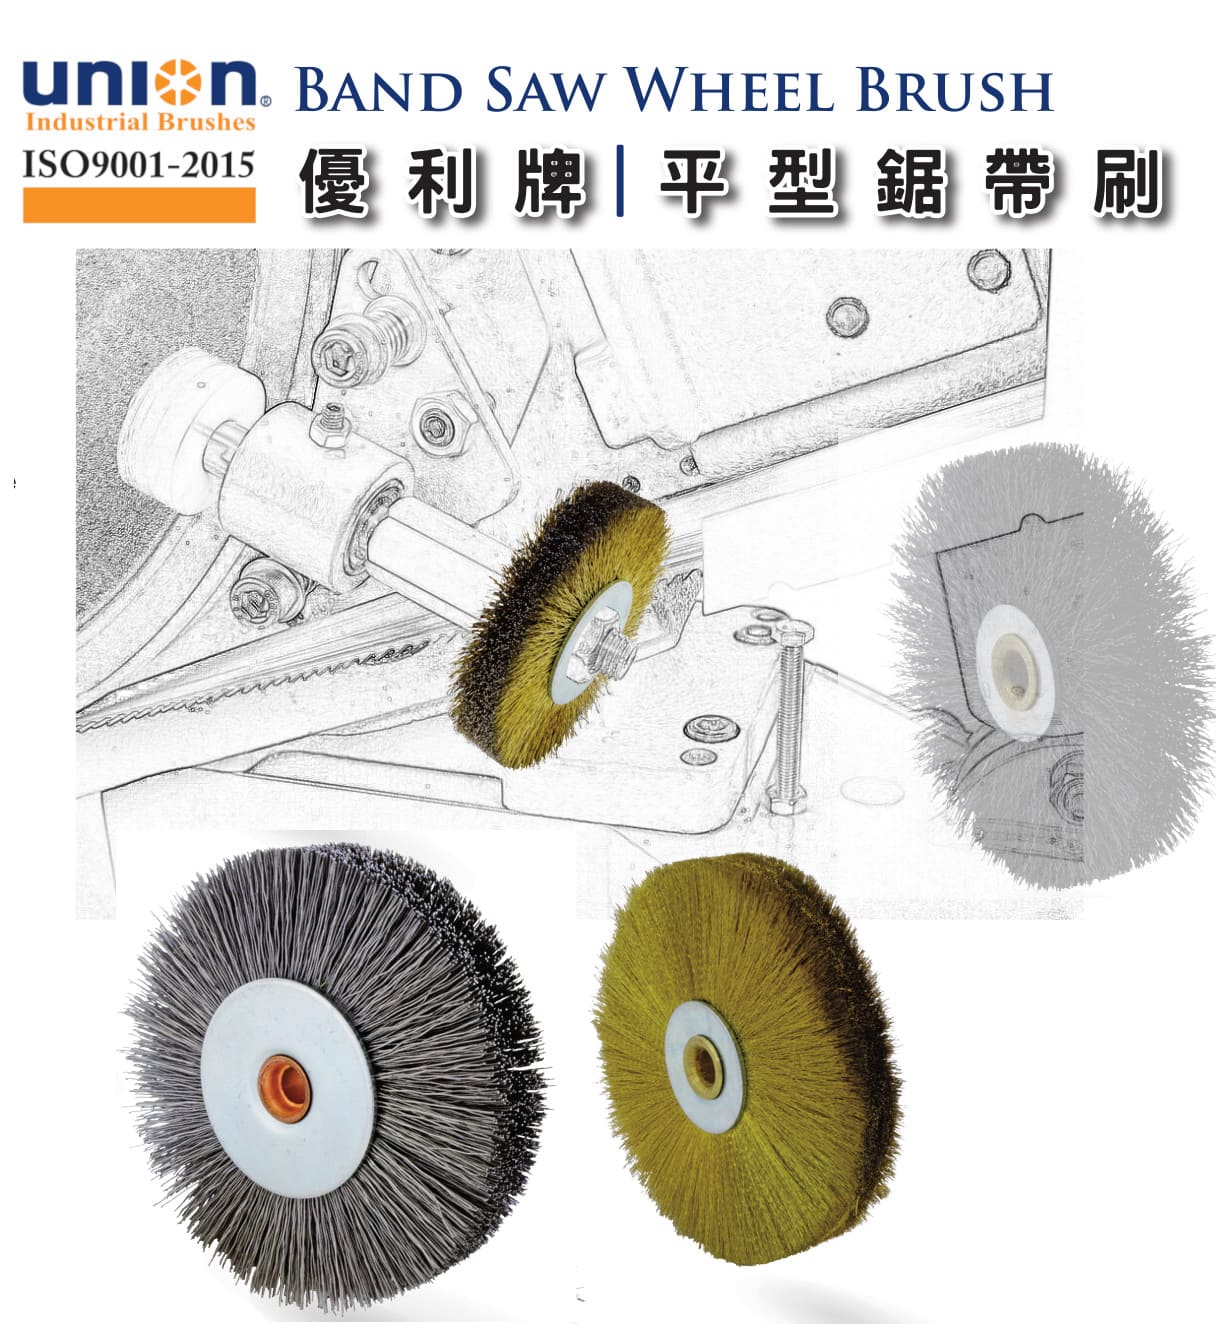 Chip Brushes for Cleaning Bandsaw Blade